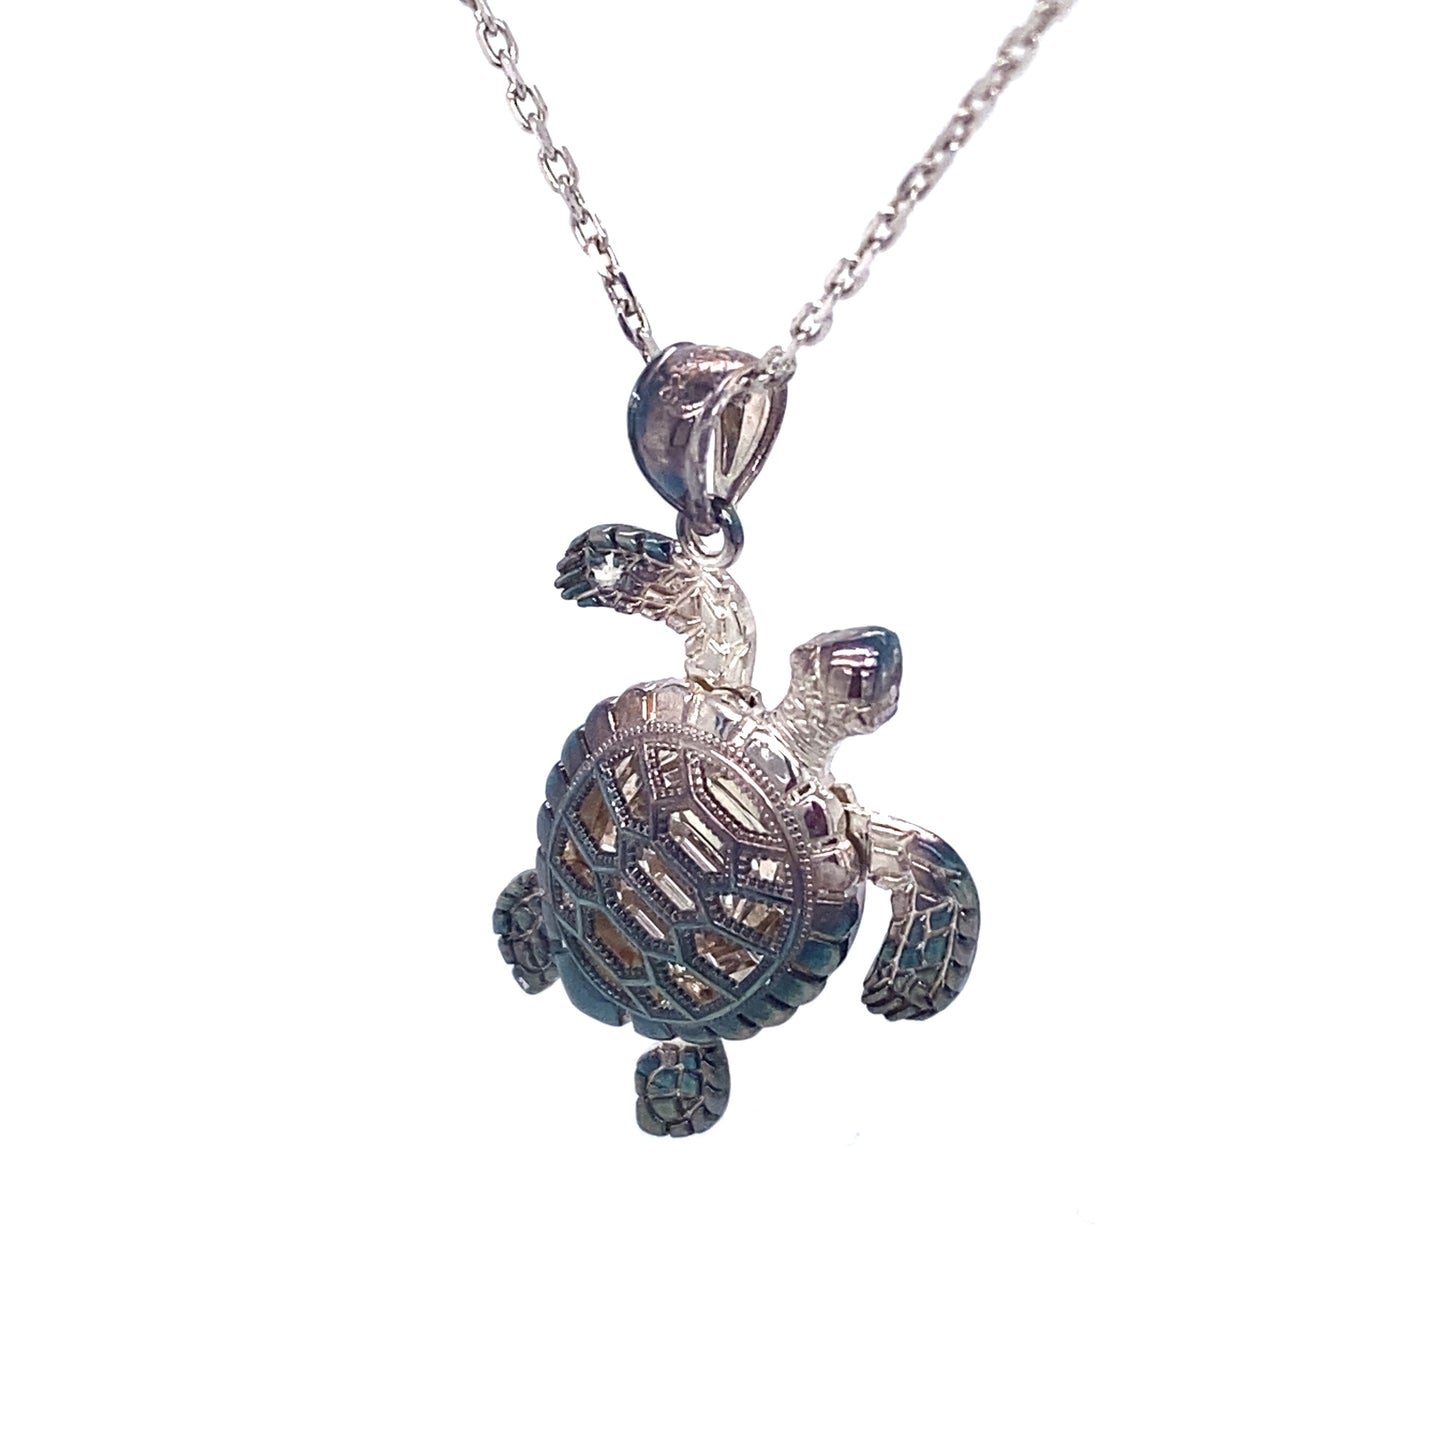 Circa 1980s Articulated Turtle Pendant and in Sterling Silver with Burnt Patina